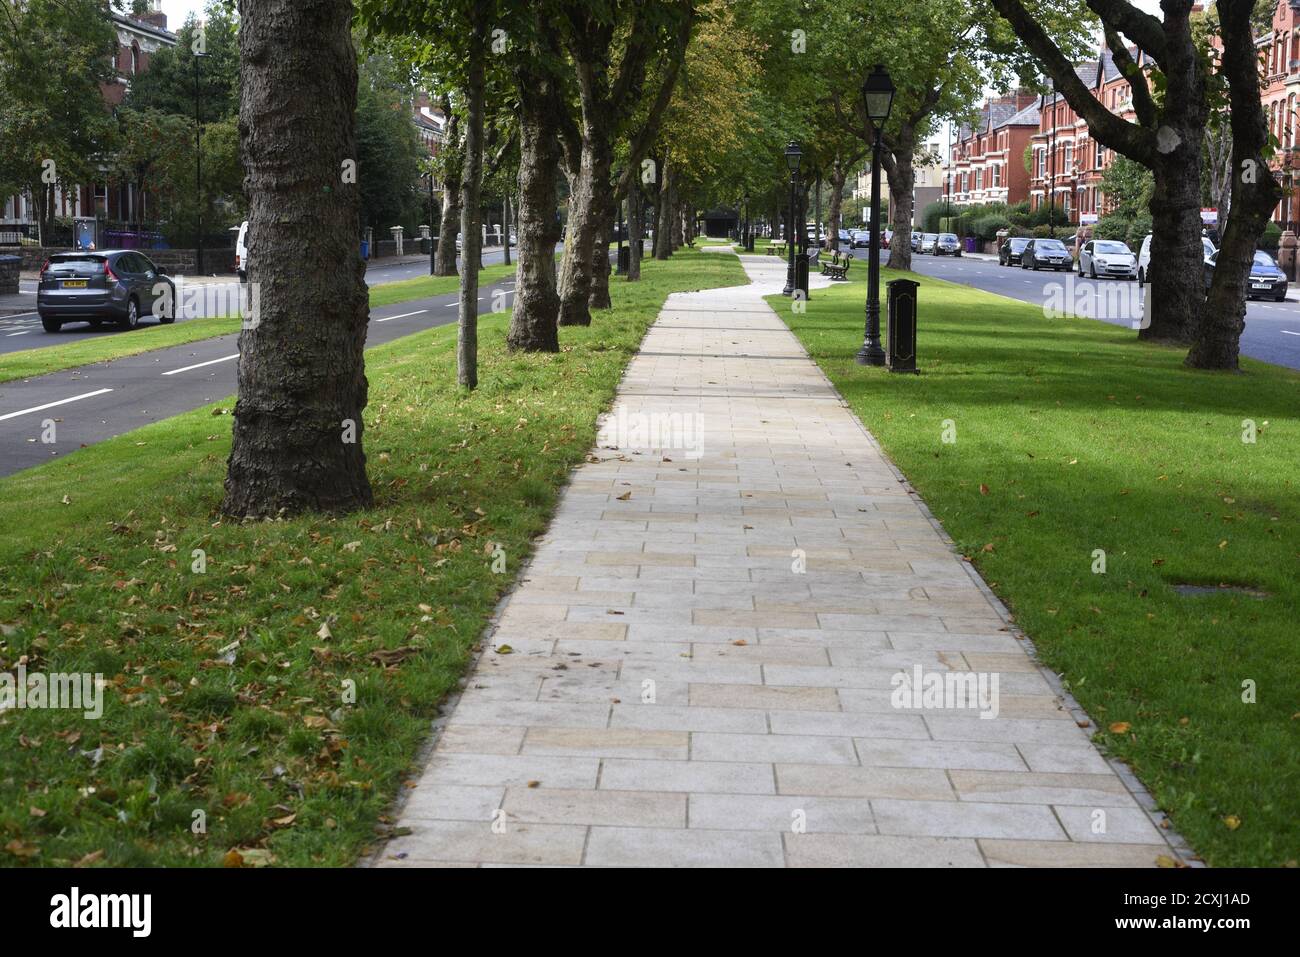 Princes Avenue / Boulevard STEP Scheme 1km path completed in 2020. This £4m scheme is part of Liverpool City Region’s Sustainable Transport Enhancemen Stock Photo